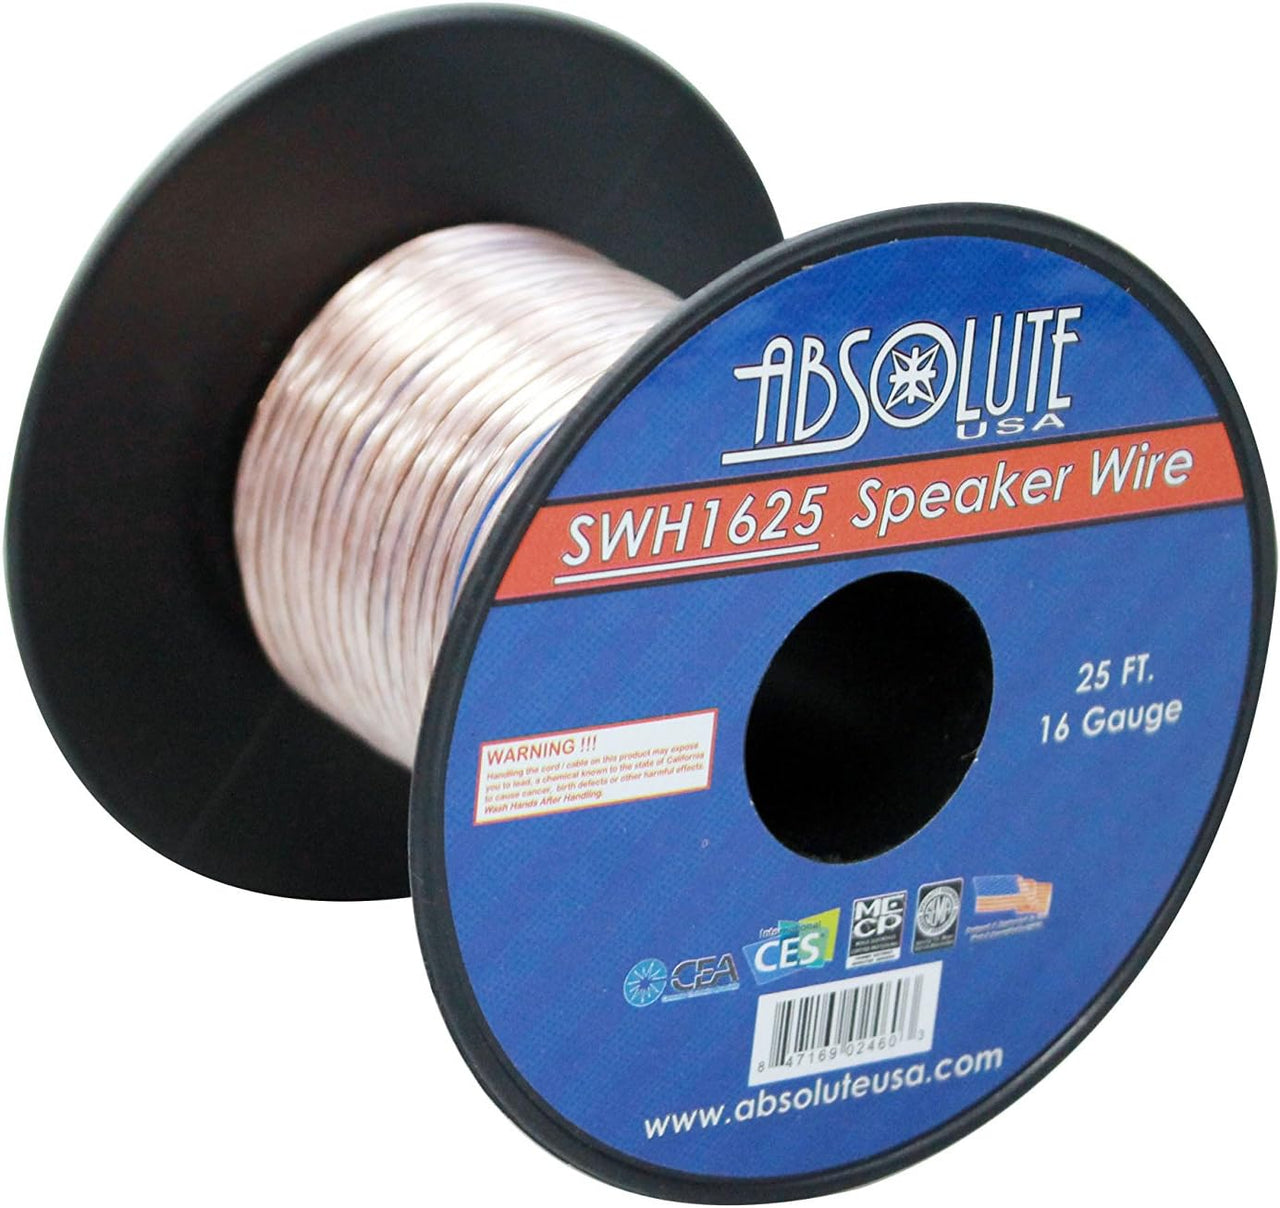 Absolute USA SWH1625 25' 16 Gauge Car Home Audio Speaker Wire Cable Spool